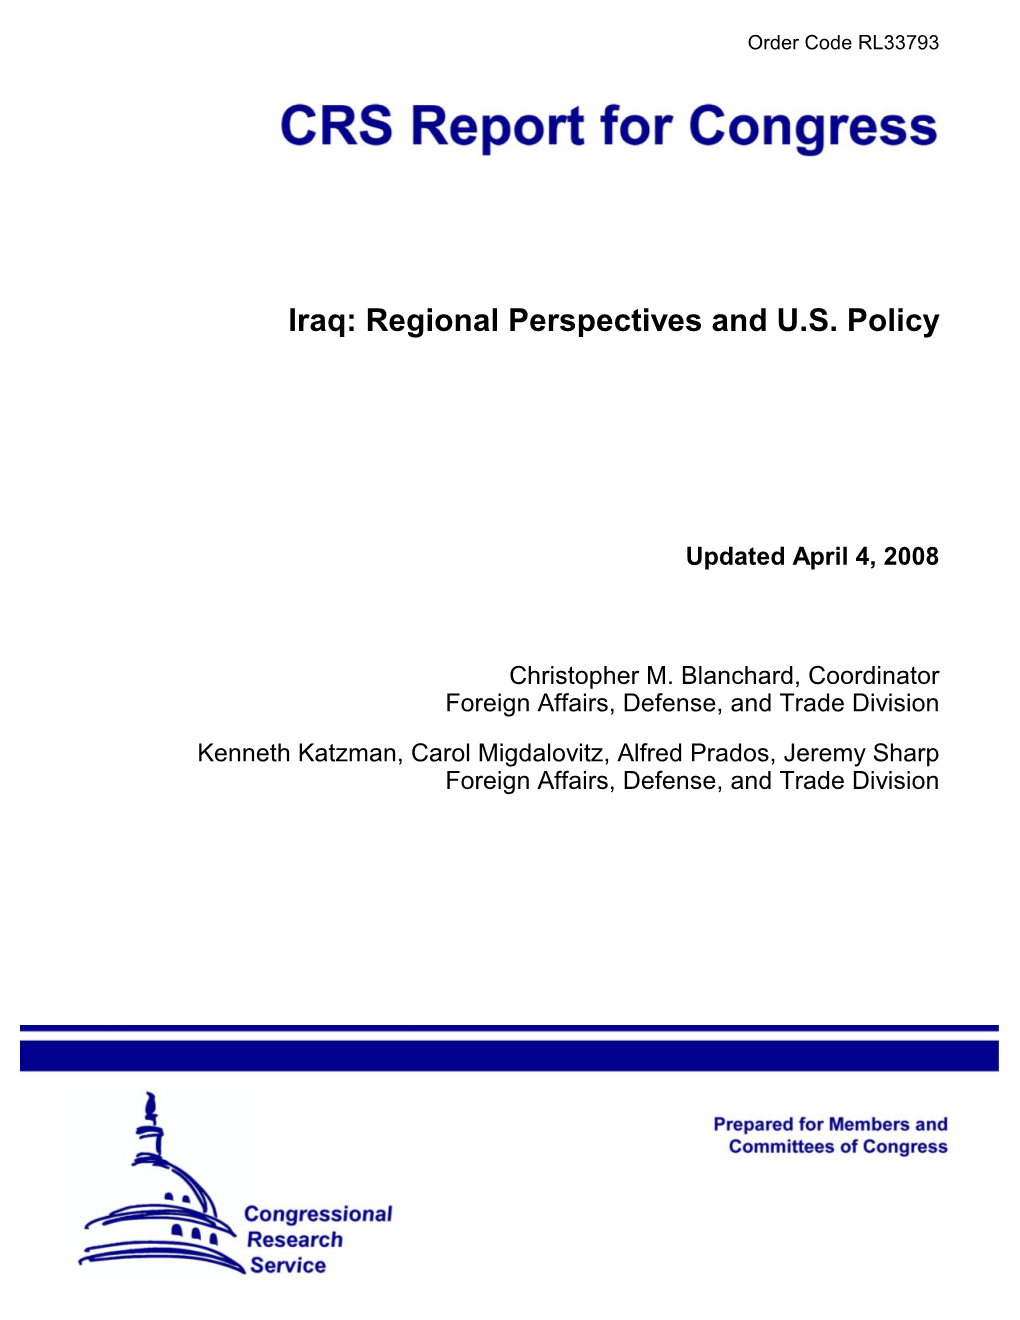 Iraq: Regional Perspectives and US Policy